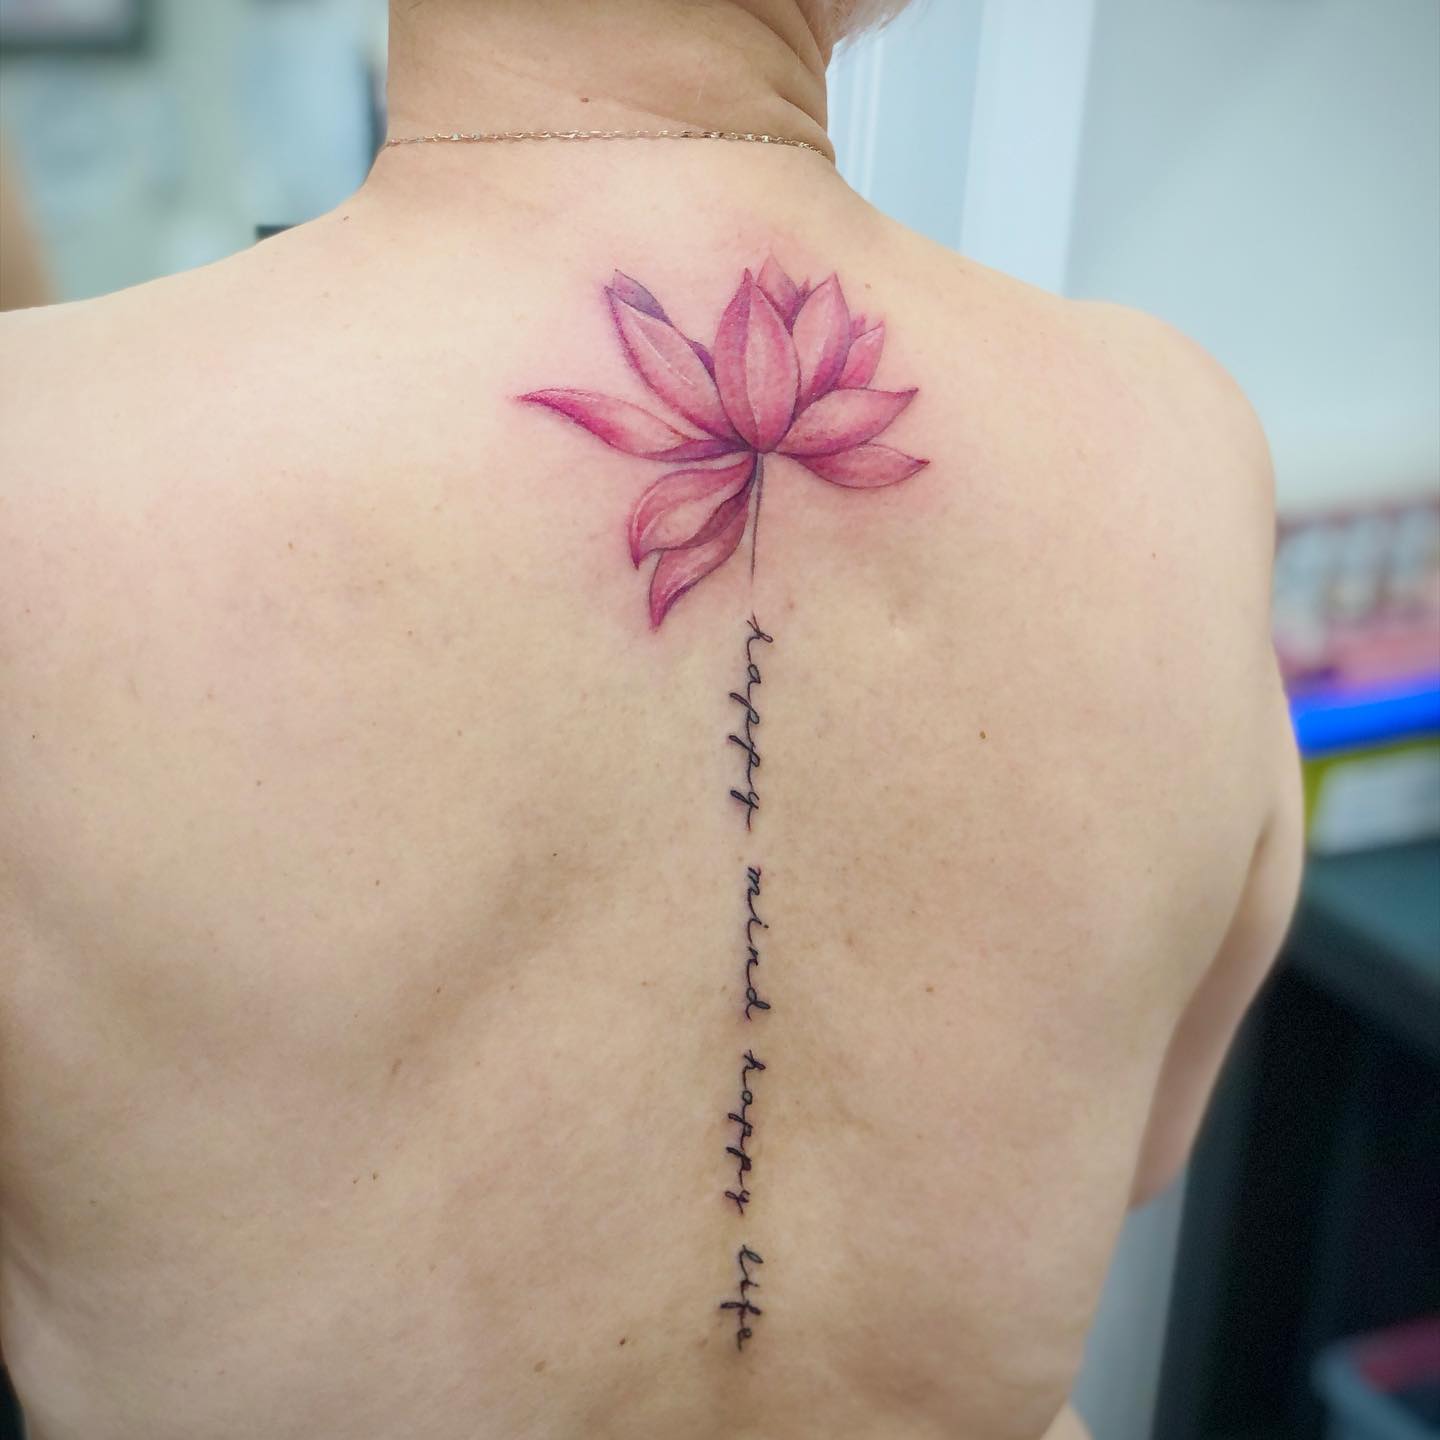 Carloz Tattoos Carl Heggarty on Twitter Different piece from today  colour lotus flower with quote running down spine Like Retweet Comment   httpstco7HOw19wKJC  Twitter